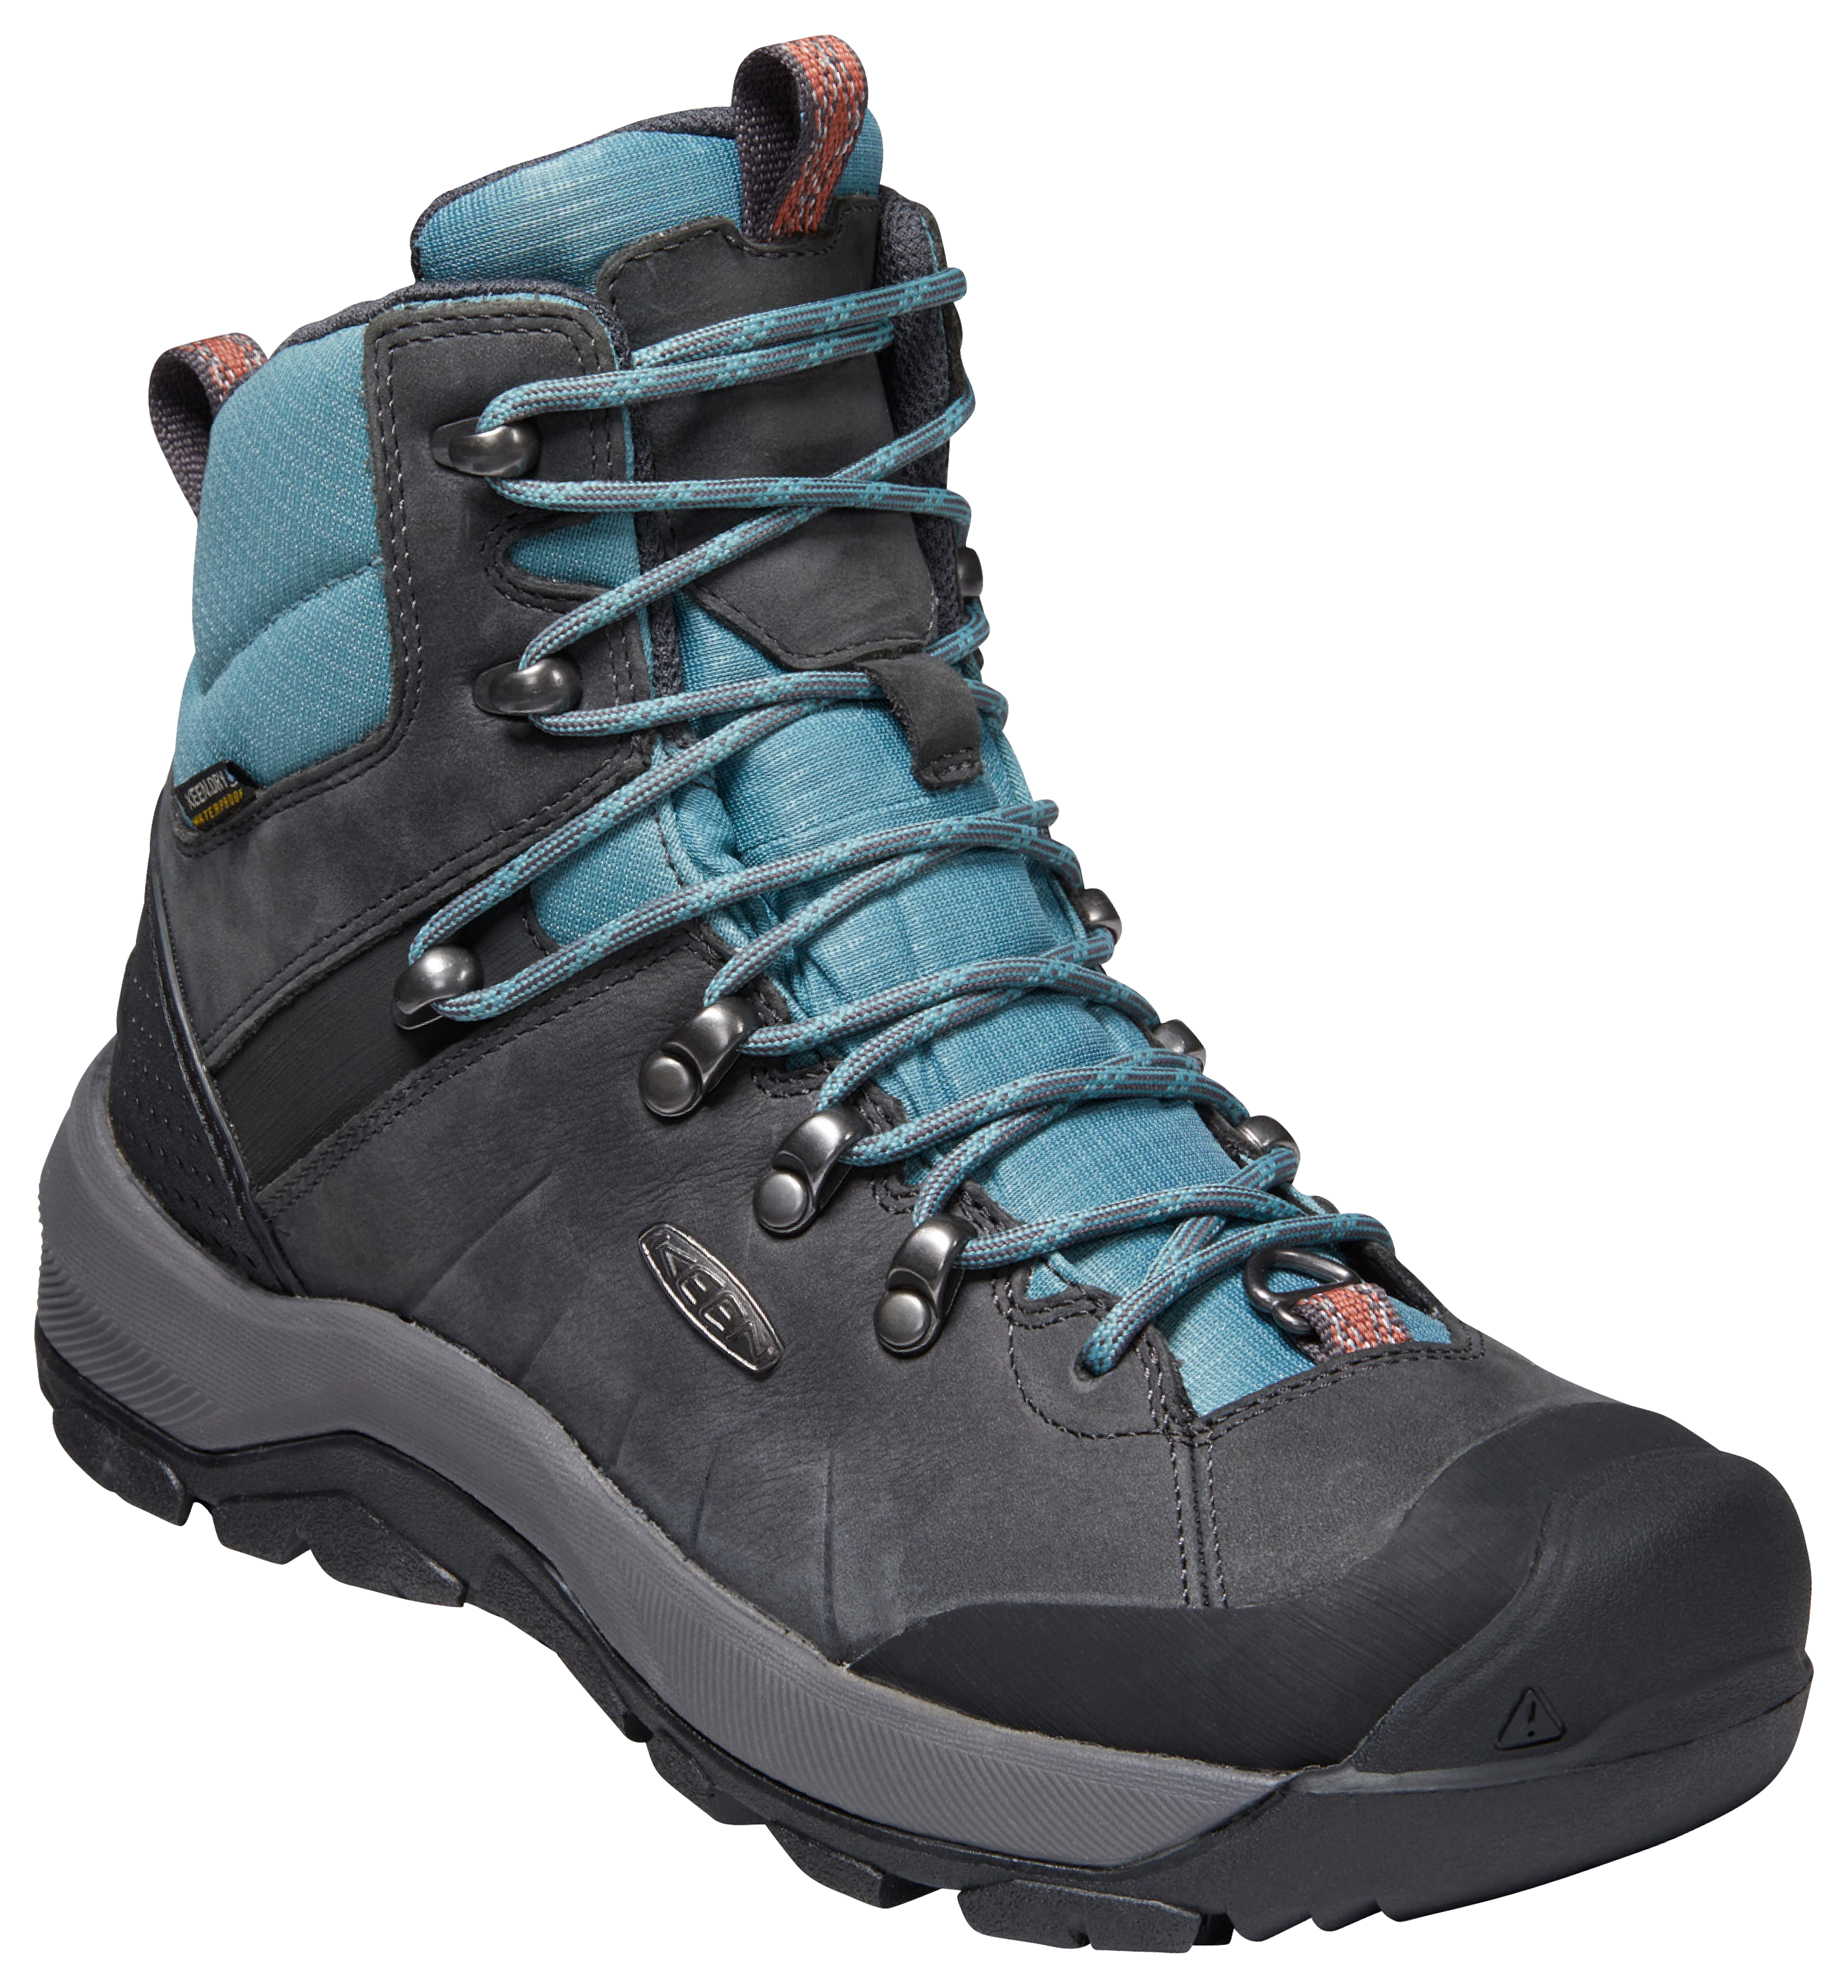 KEEN Revel IV Polar Insulated Waterproof Hiking Boots for Ladies